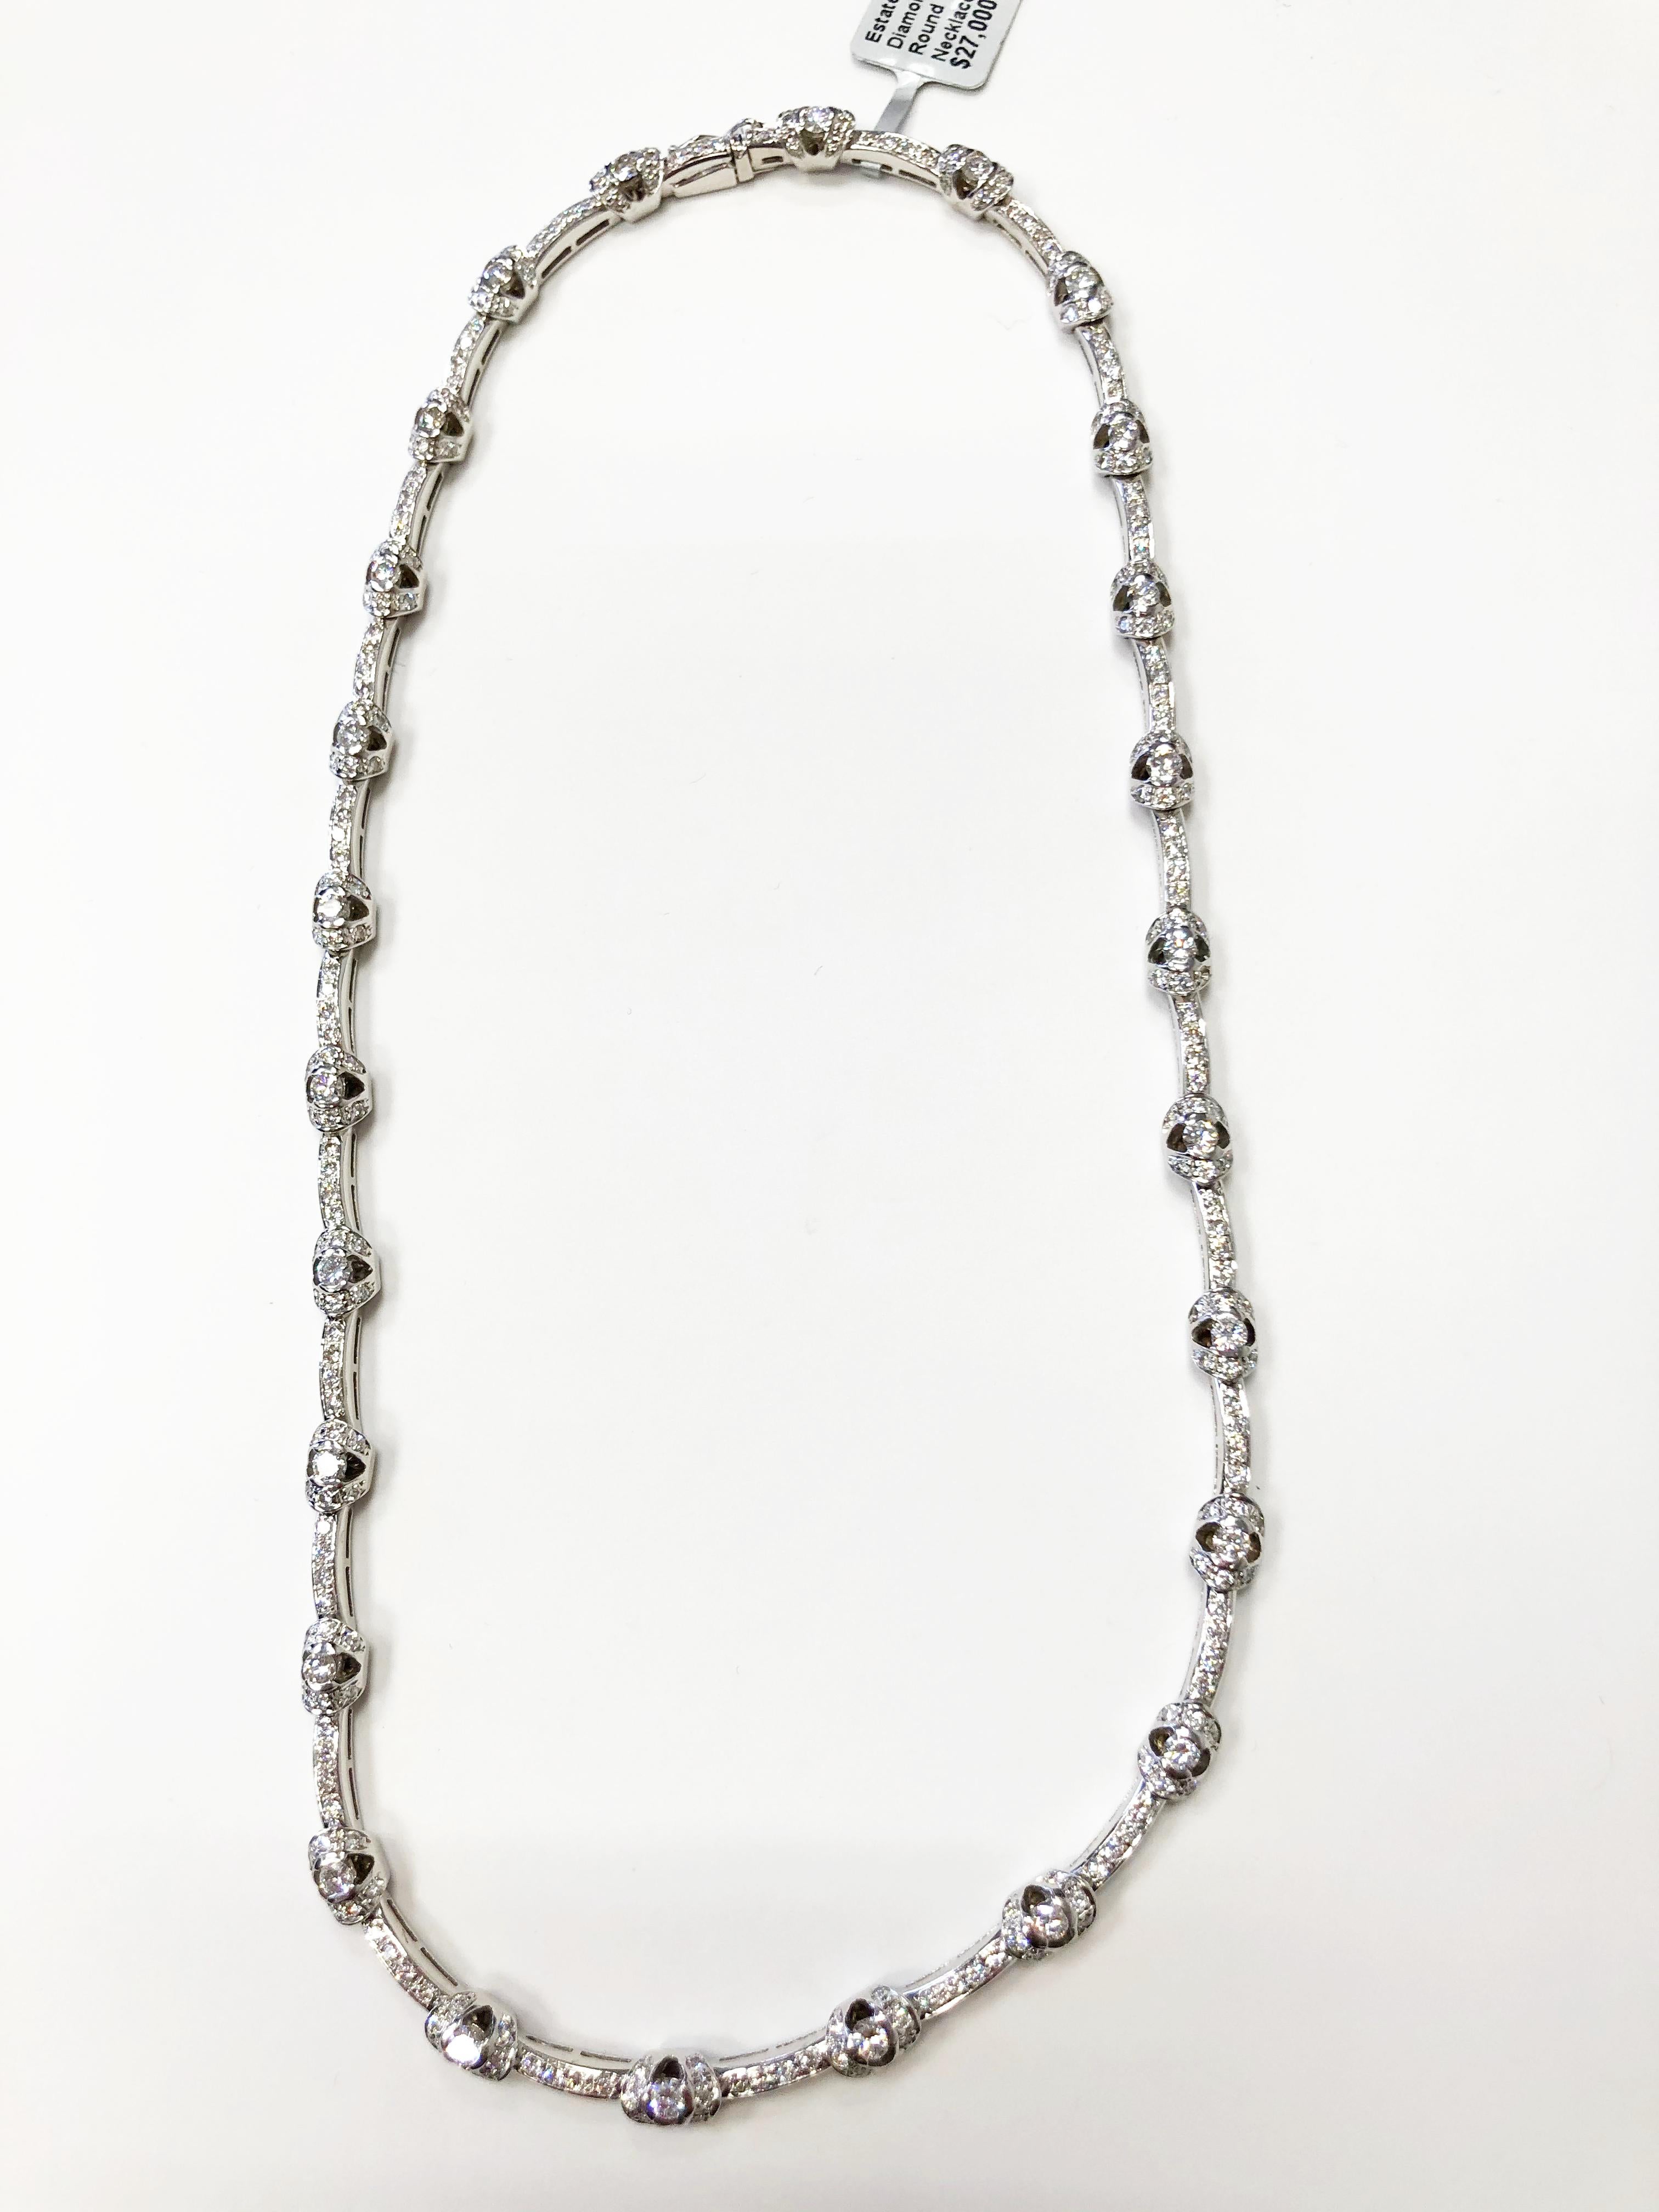 Beautiful estate white diamond necklace with 8.40 carats of good quality, white, and bright diamond rounds. Handmade 18k white gold mounting. Flexible and easy to wear design makes this piece good for everyday or for a special occasion. 17” length.